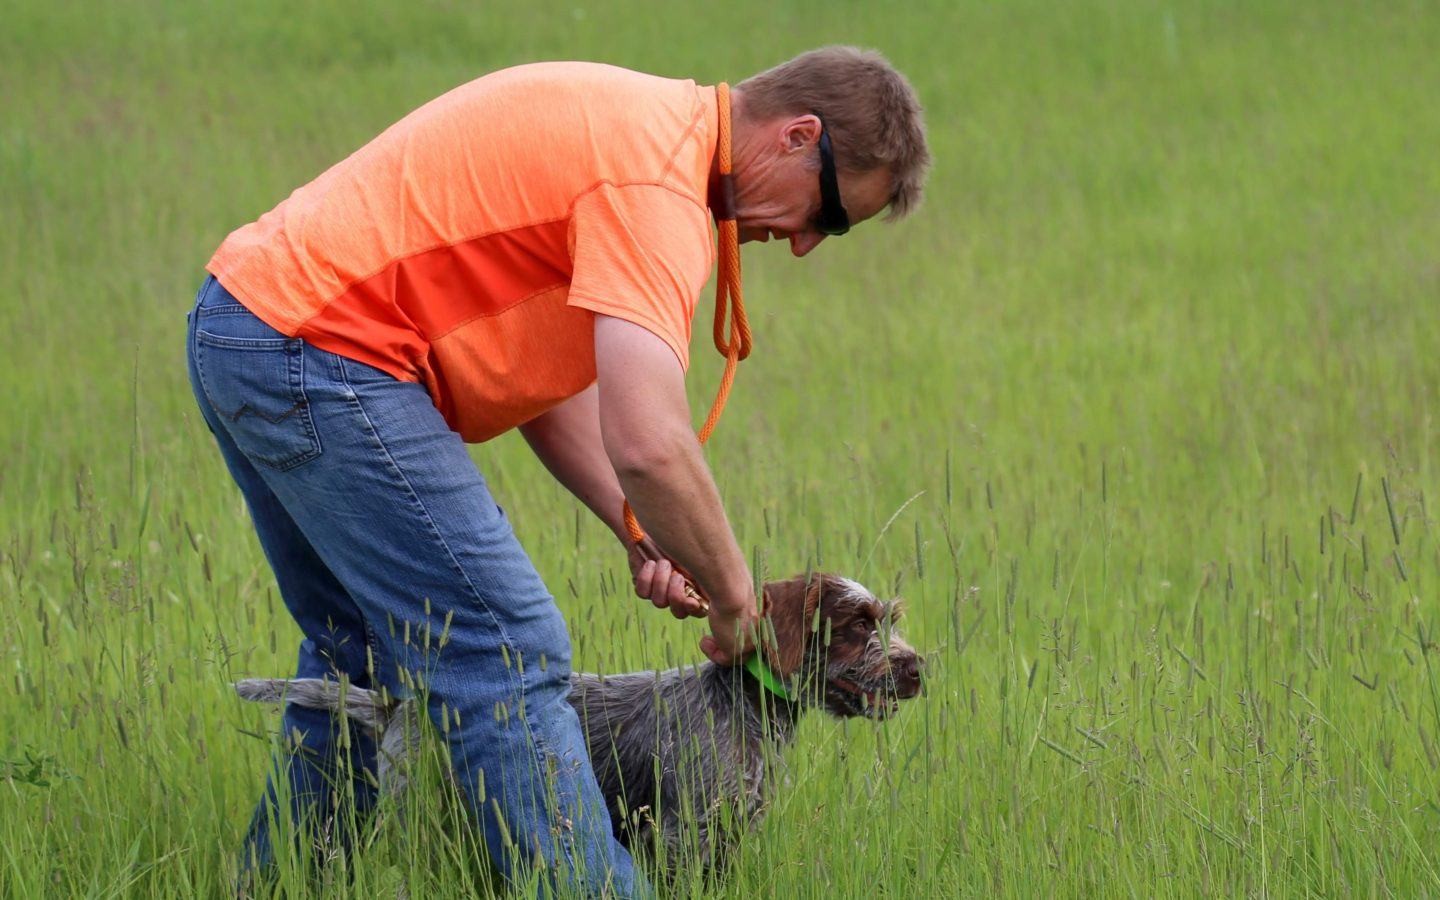 man in bright orange shirt bending over to tie a leash on a hunting dog